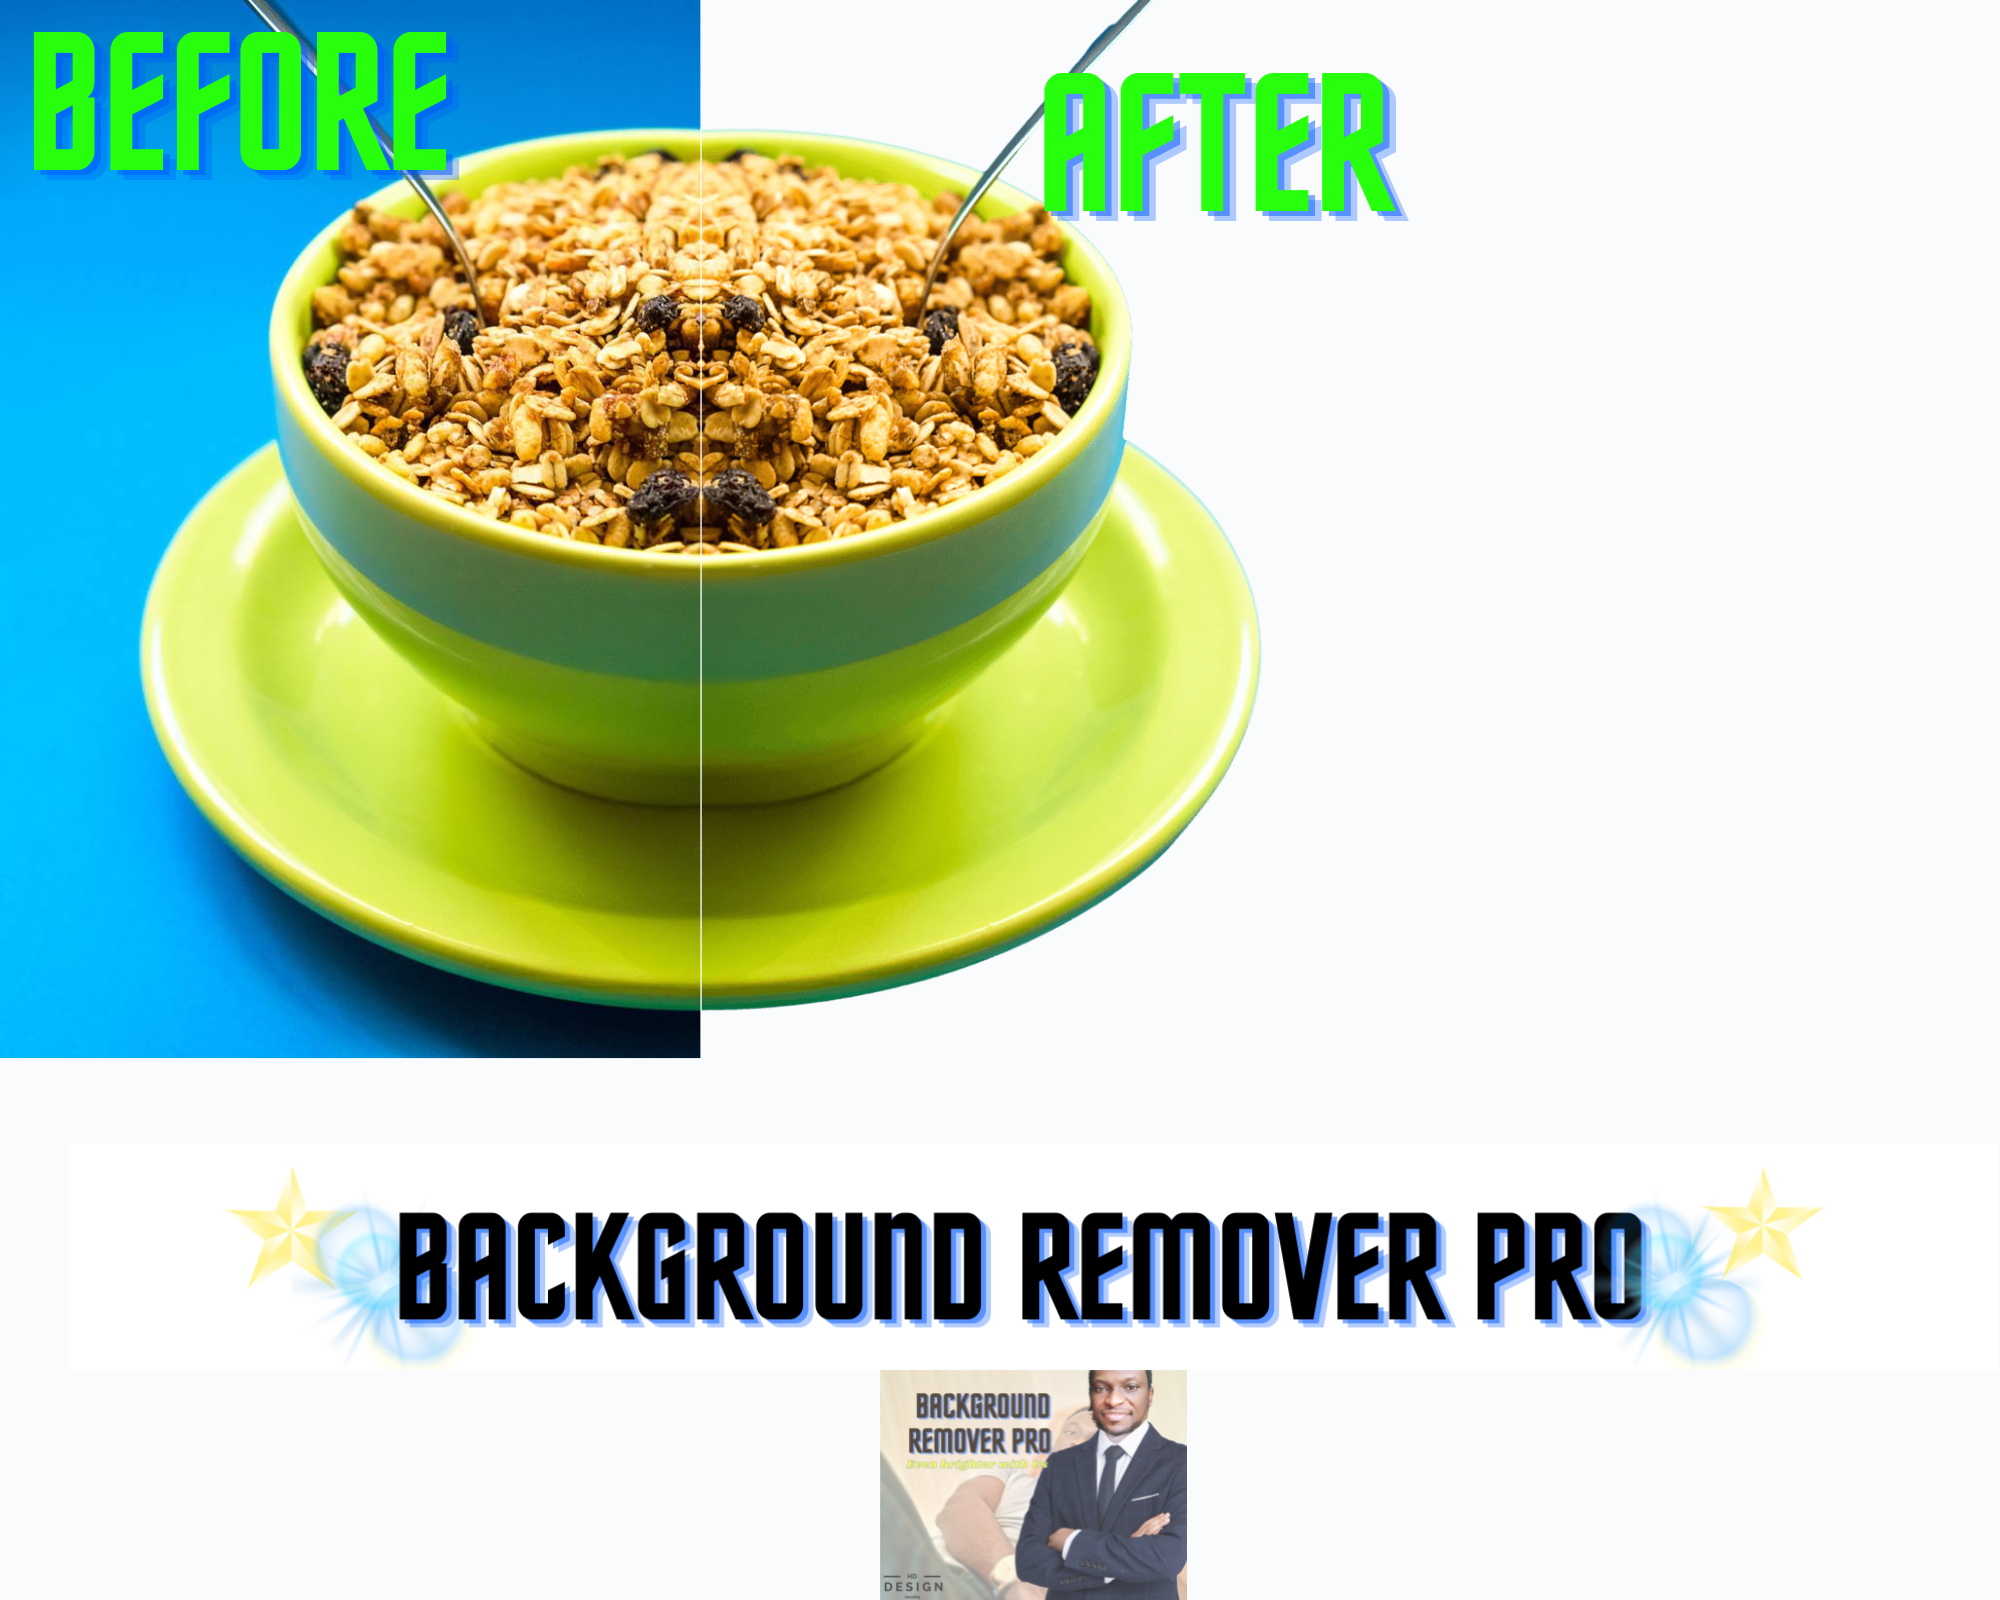 24458You will get Background Removing service of product Images for E-commerce site